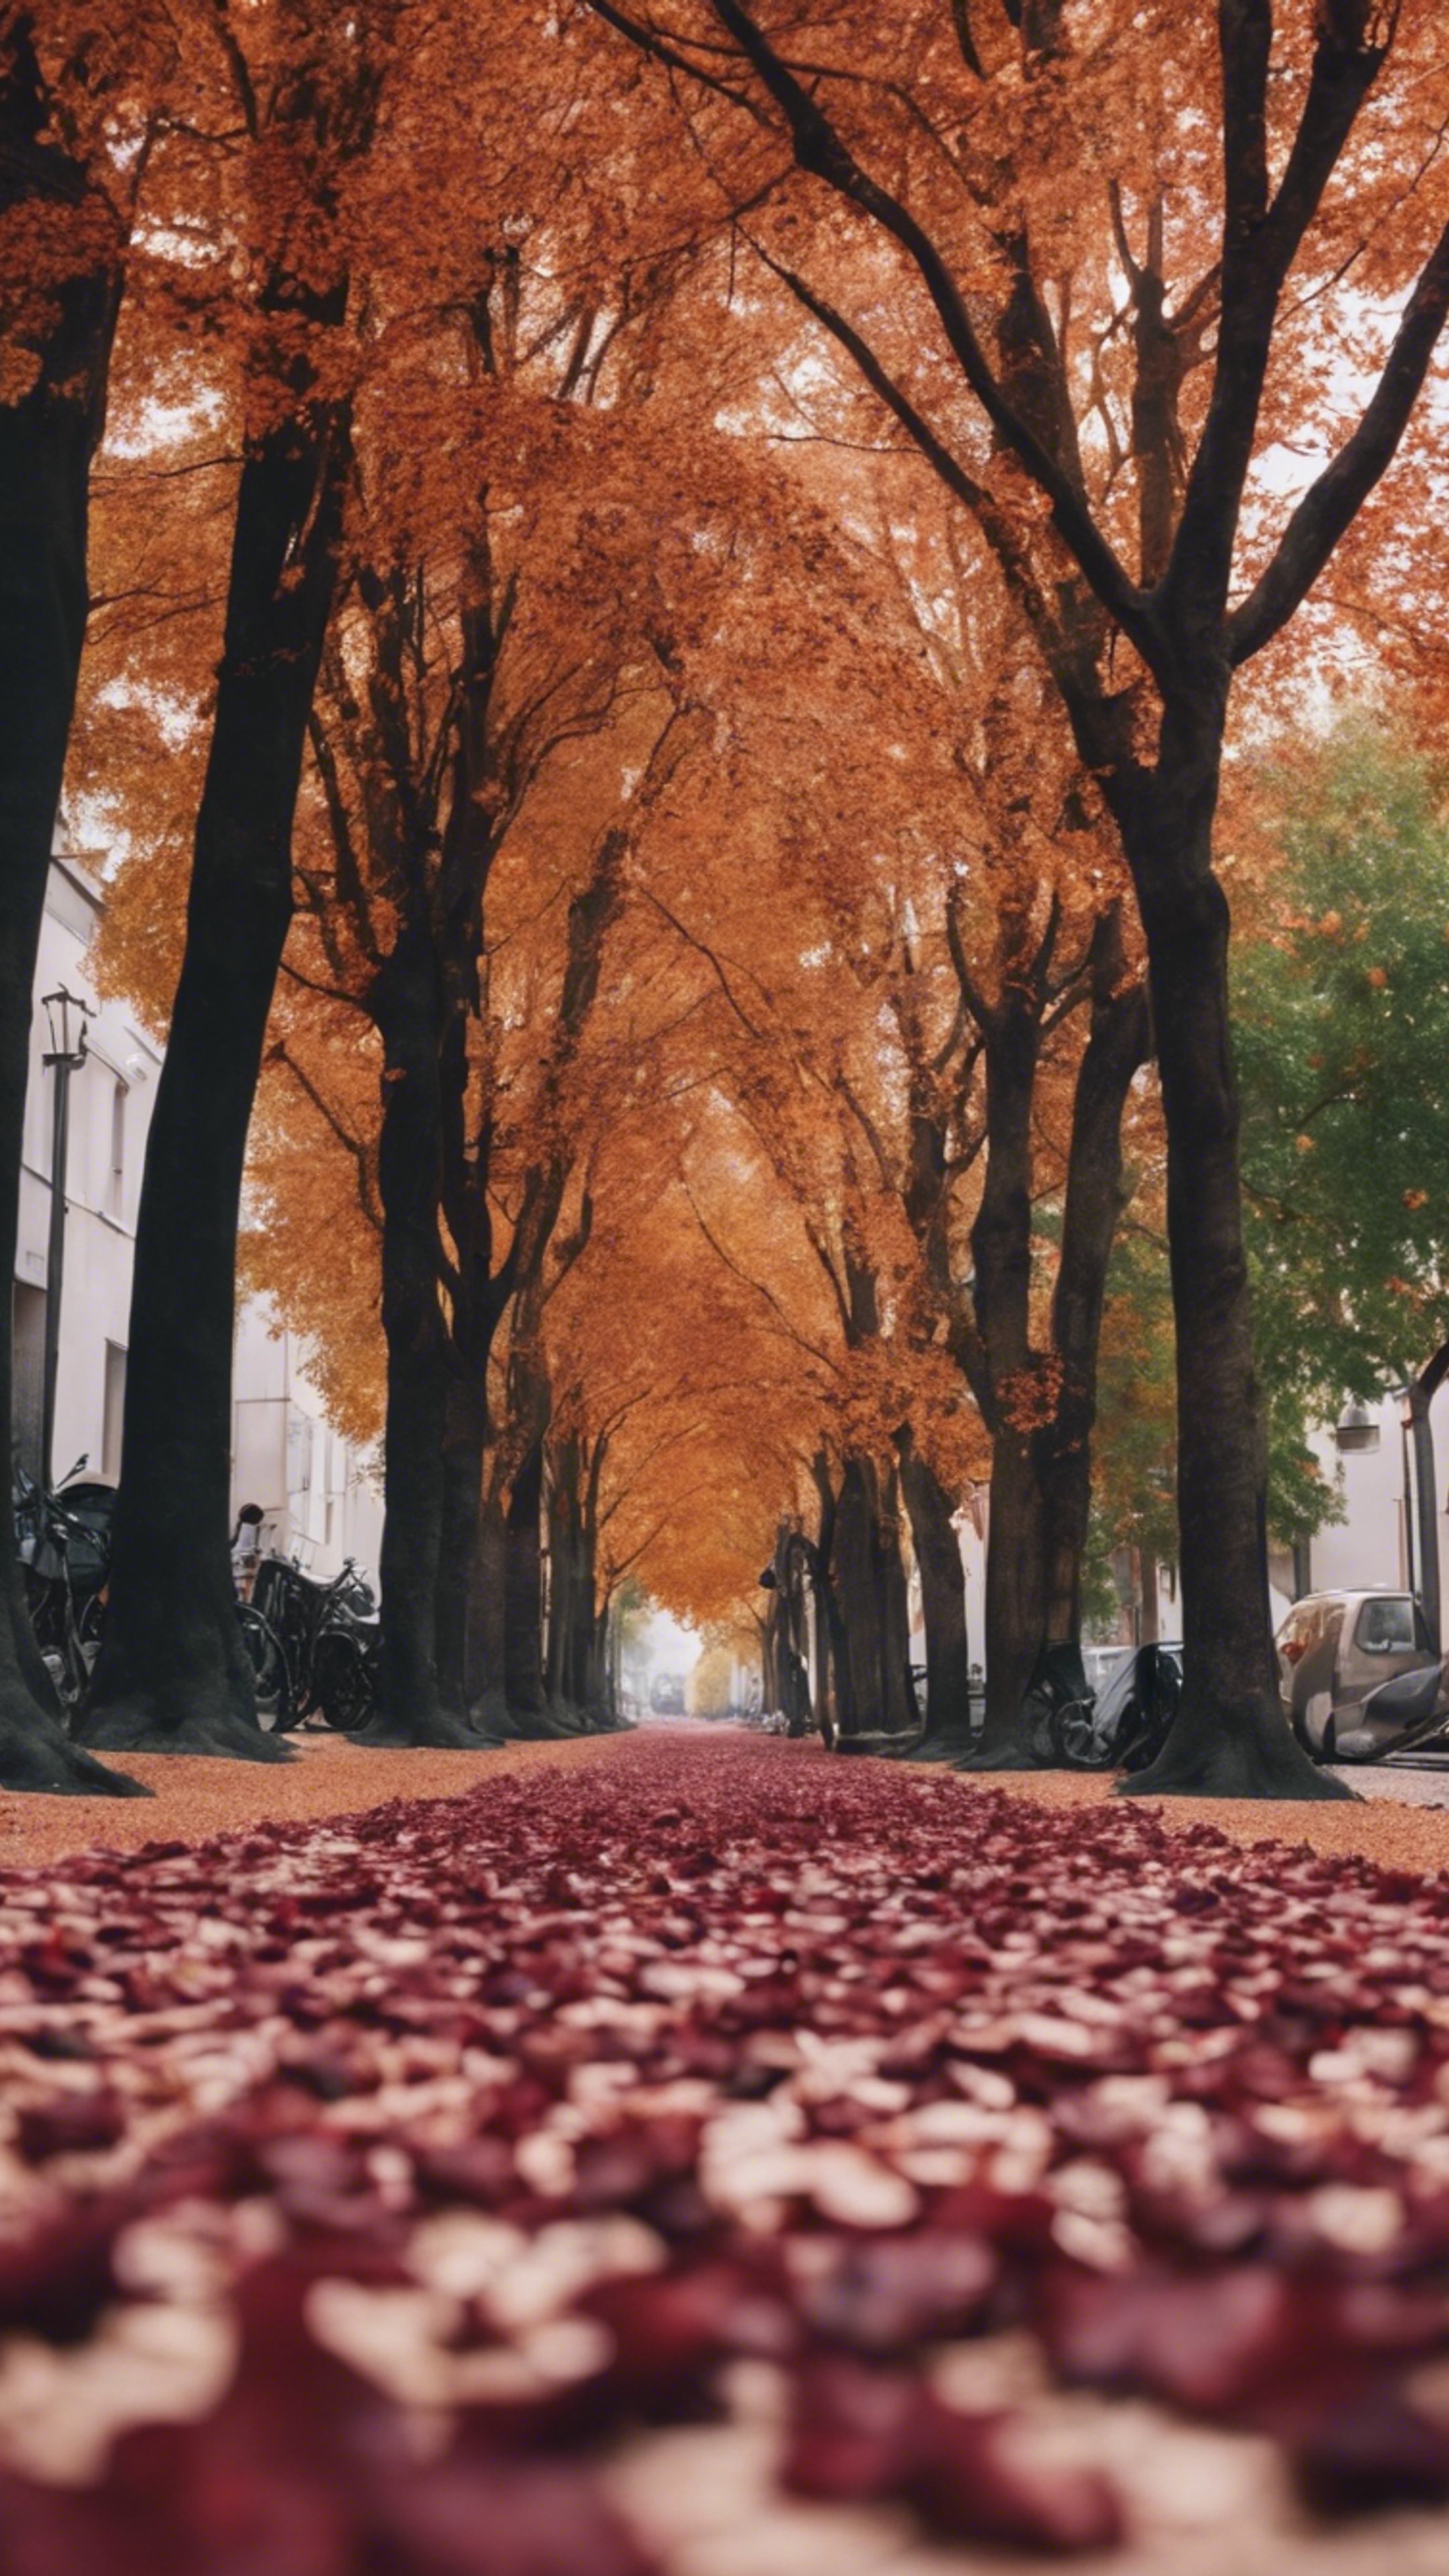 A street in autumn with burgundy leaves falling from the trees creating a beautiful comfortable carpet.壁紙[db339216d700423d88d1]